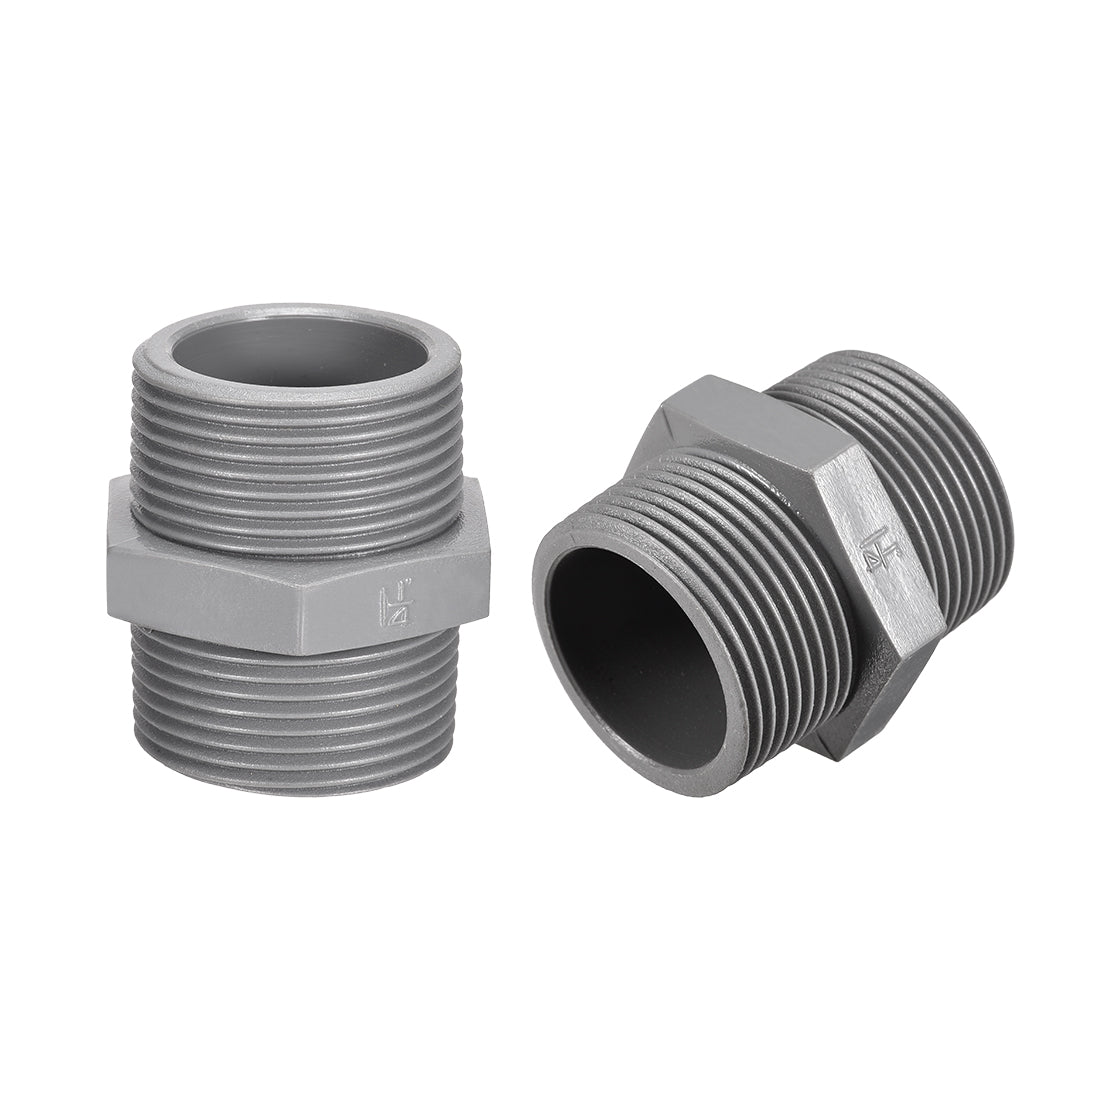 uxcell Uxcell Pipe Fittings Connector G1-1/4 x G1-1/4 Male Thread Adapter Plastic Hex Connector 2pcs